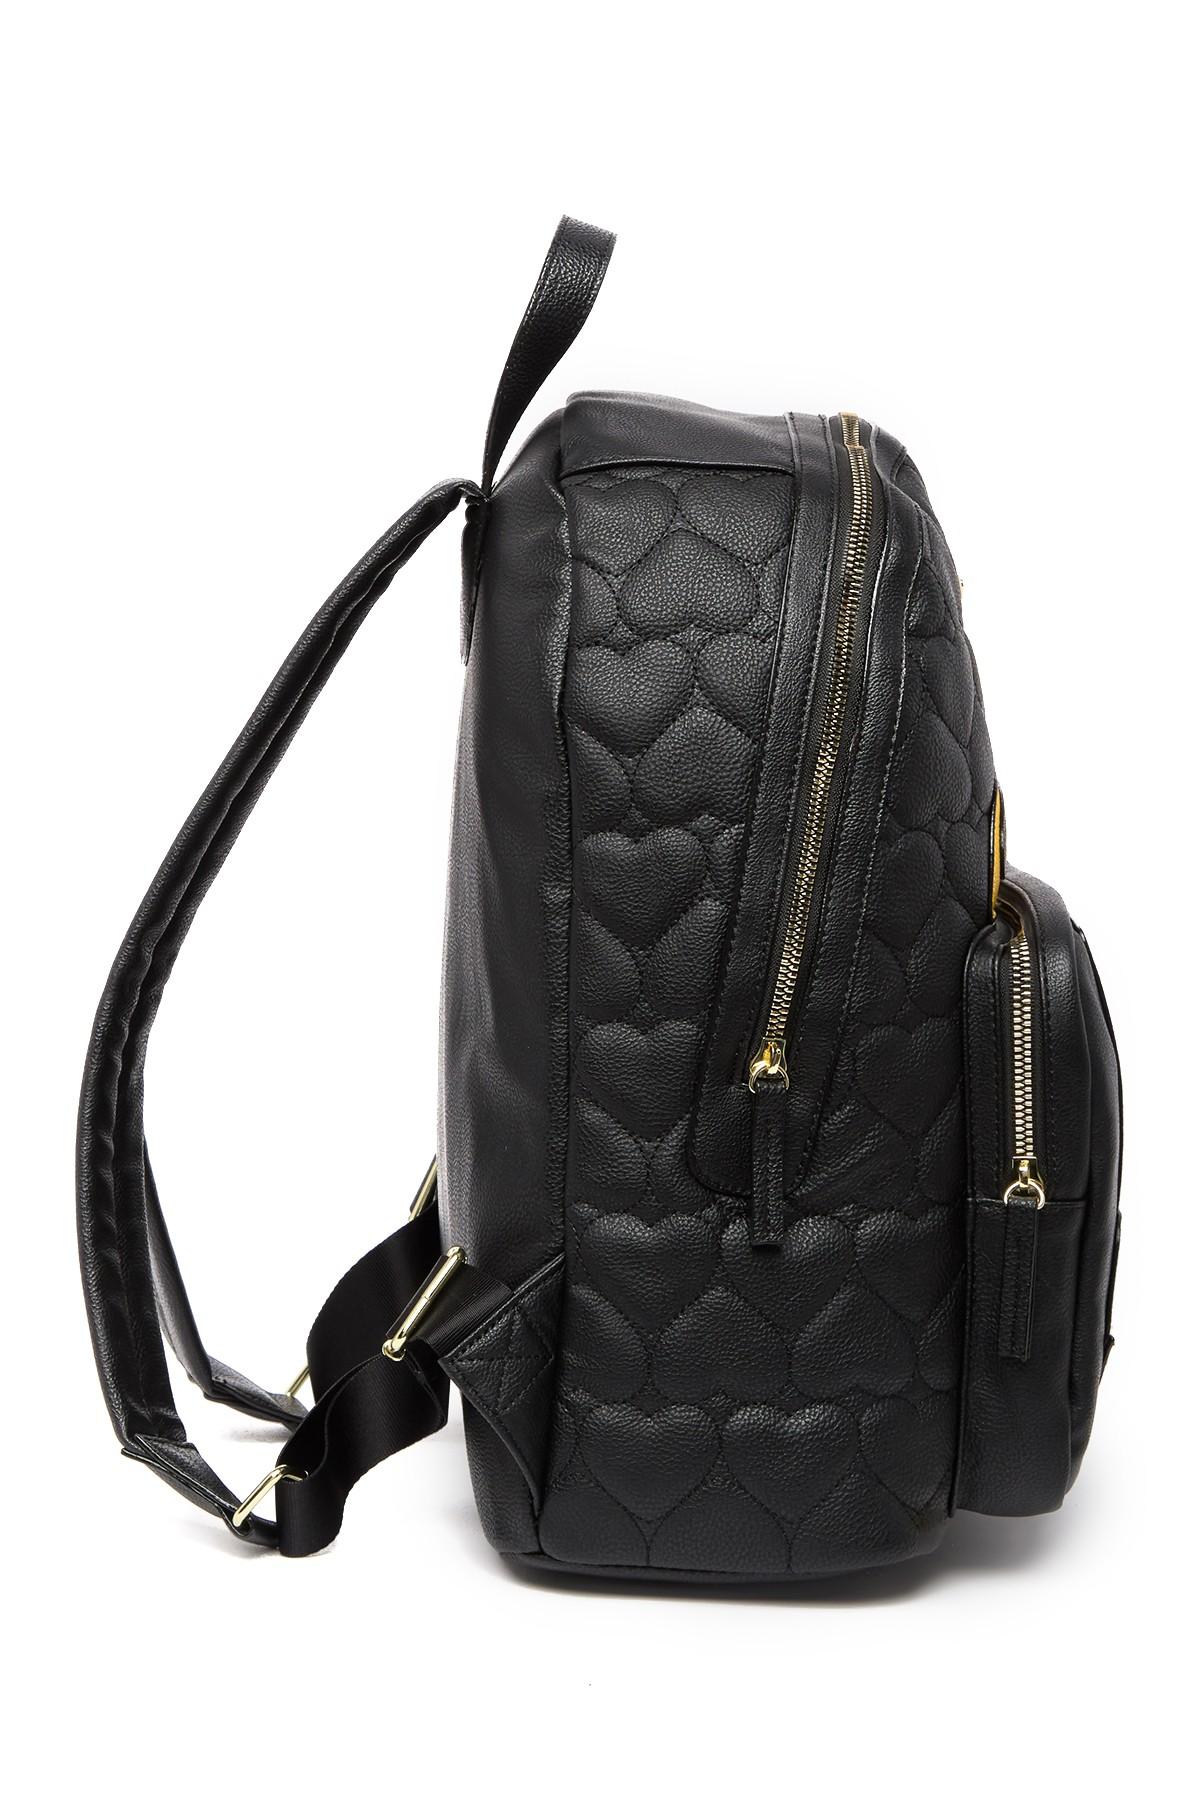 Betsey Johnson Wheels On The Bus Backpack in Black | Lyst